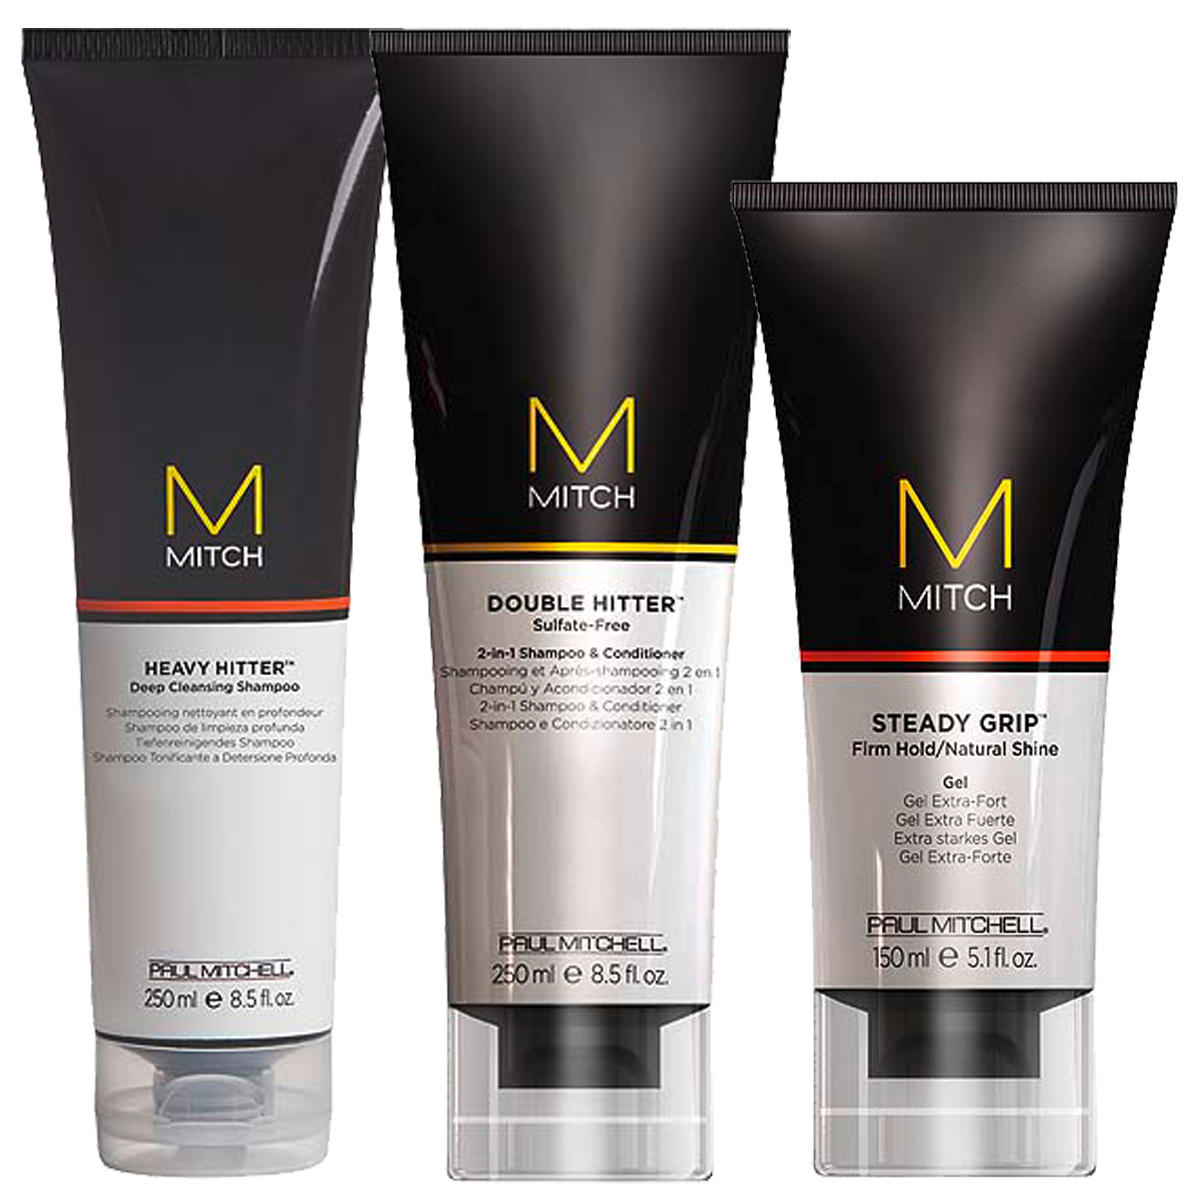 Paul Mitchell Mitch For Men Strong Hair Set  - 1